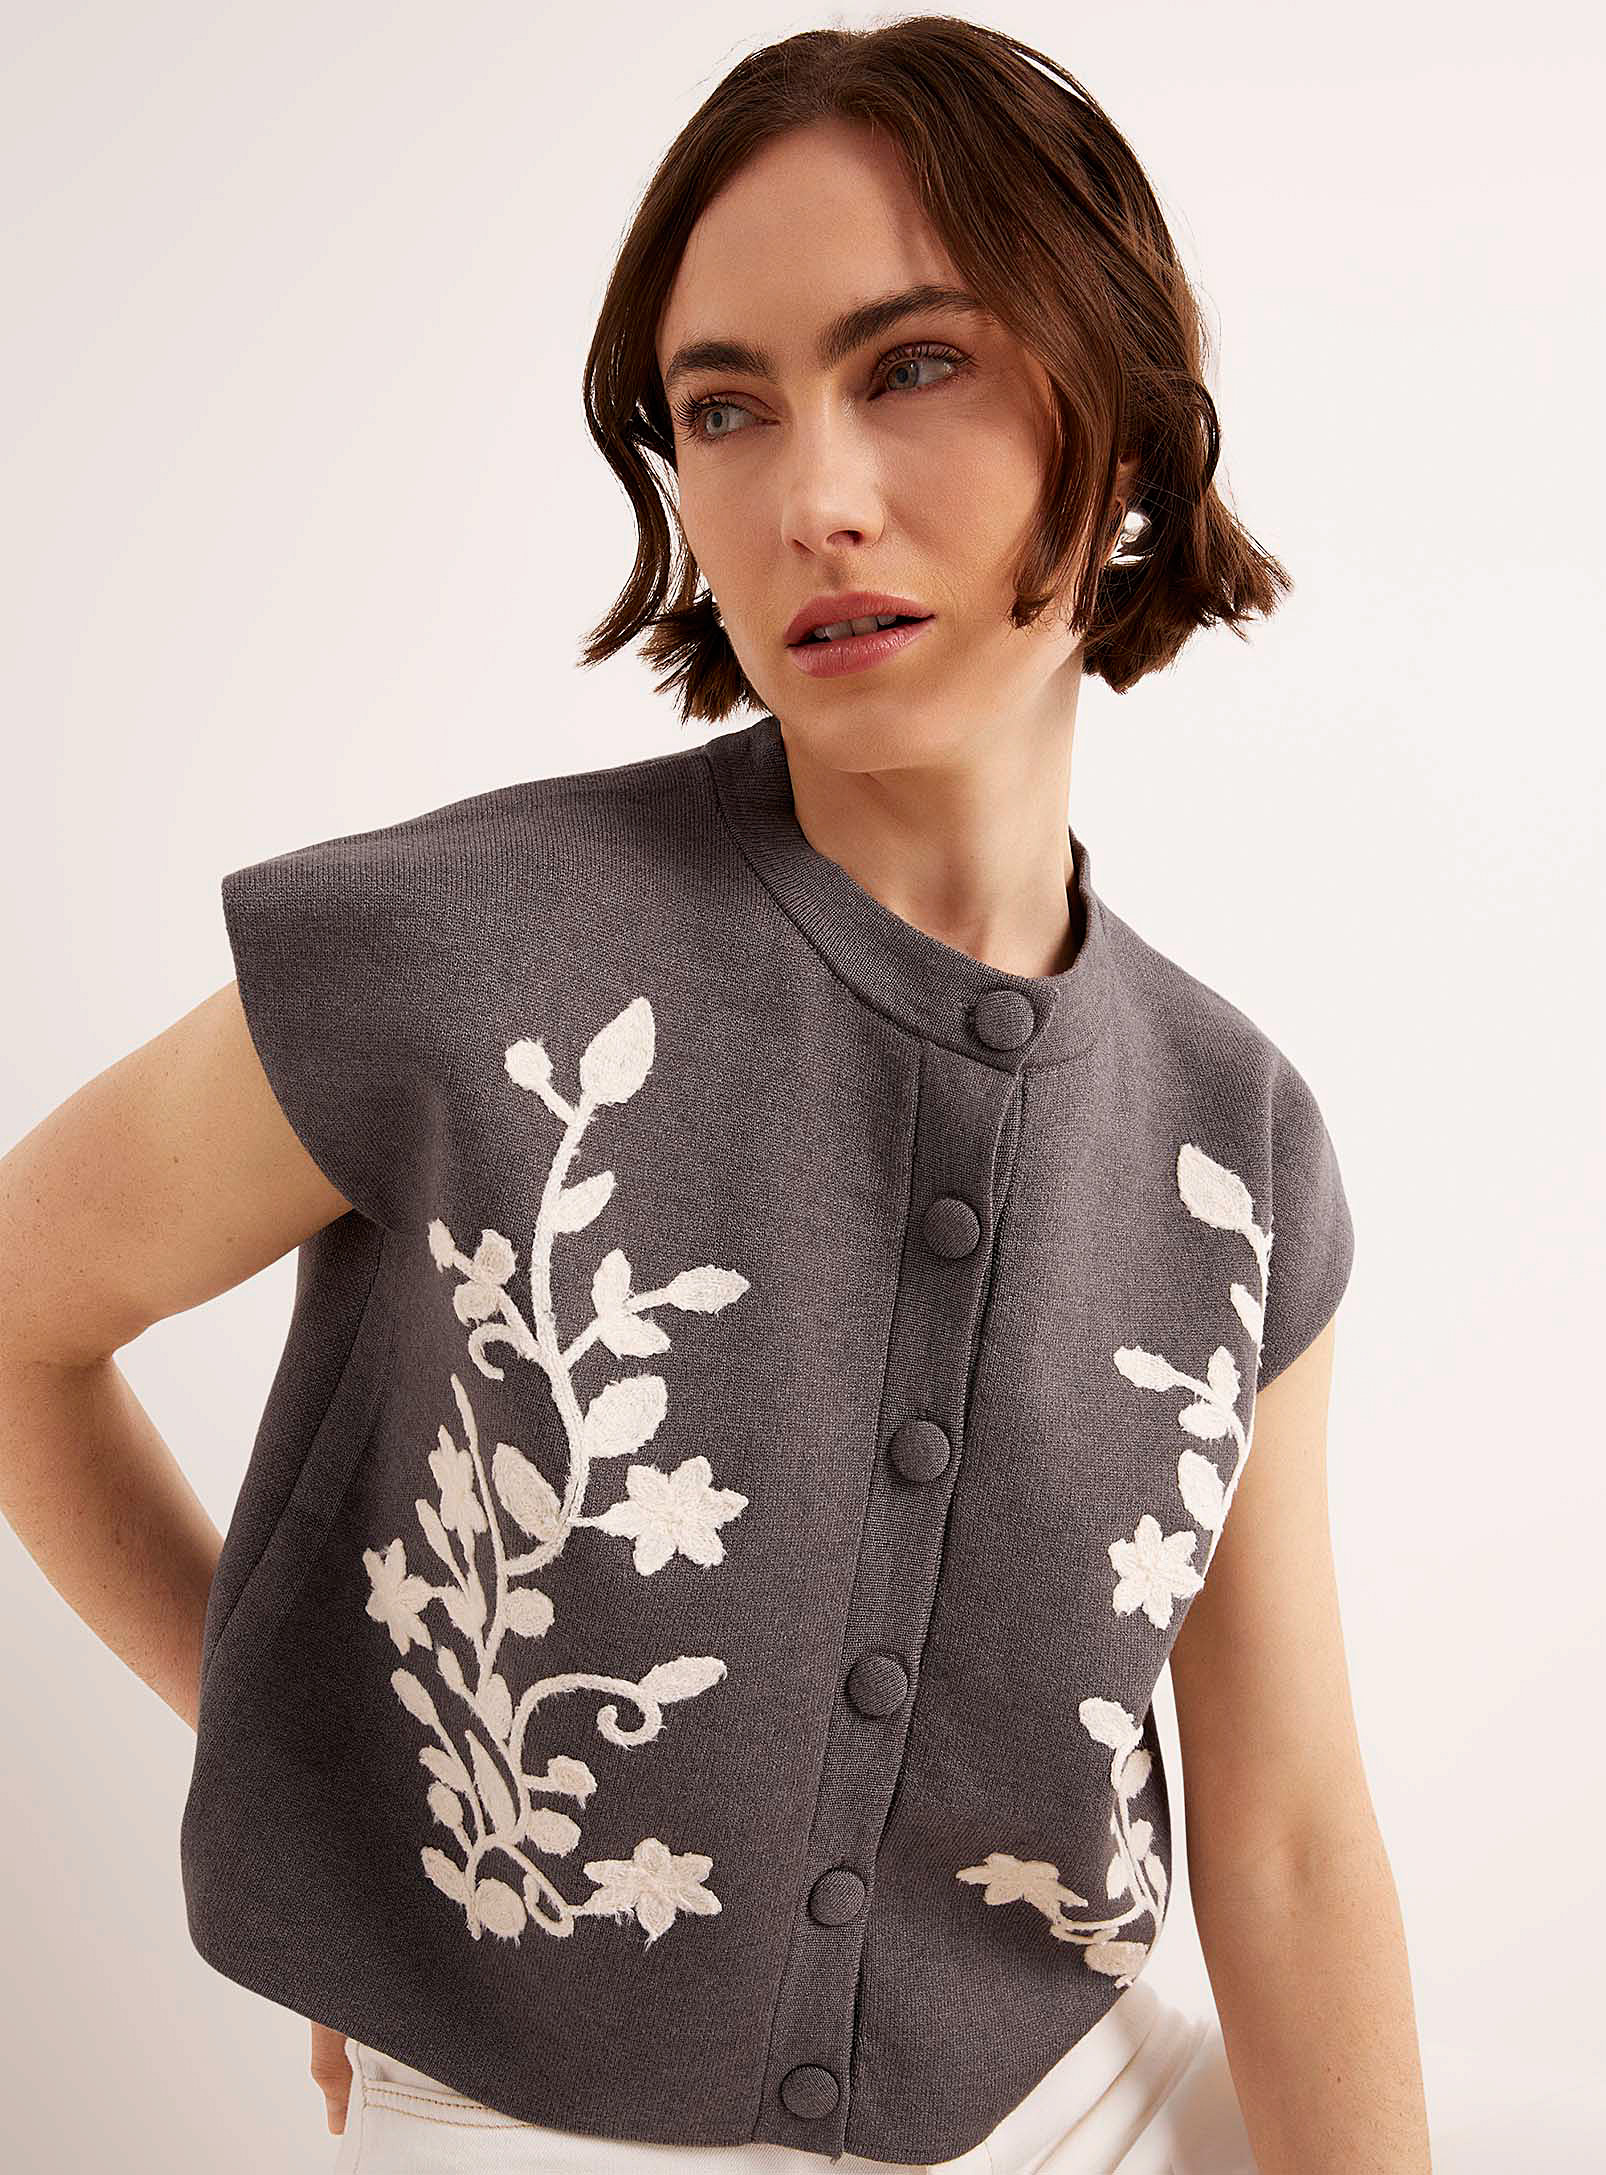 Contemporaine Ivory Embroidery Buttoned Sweater Vest In Charcoal